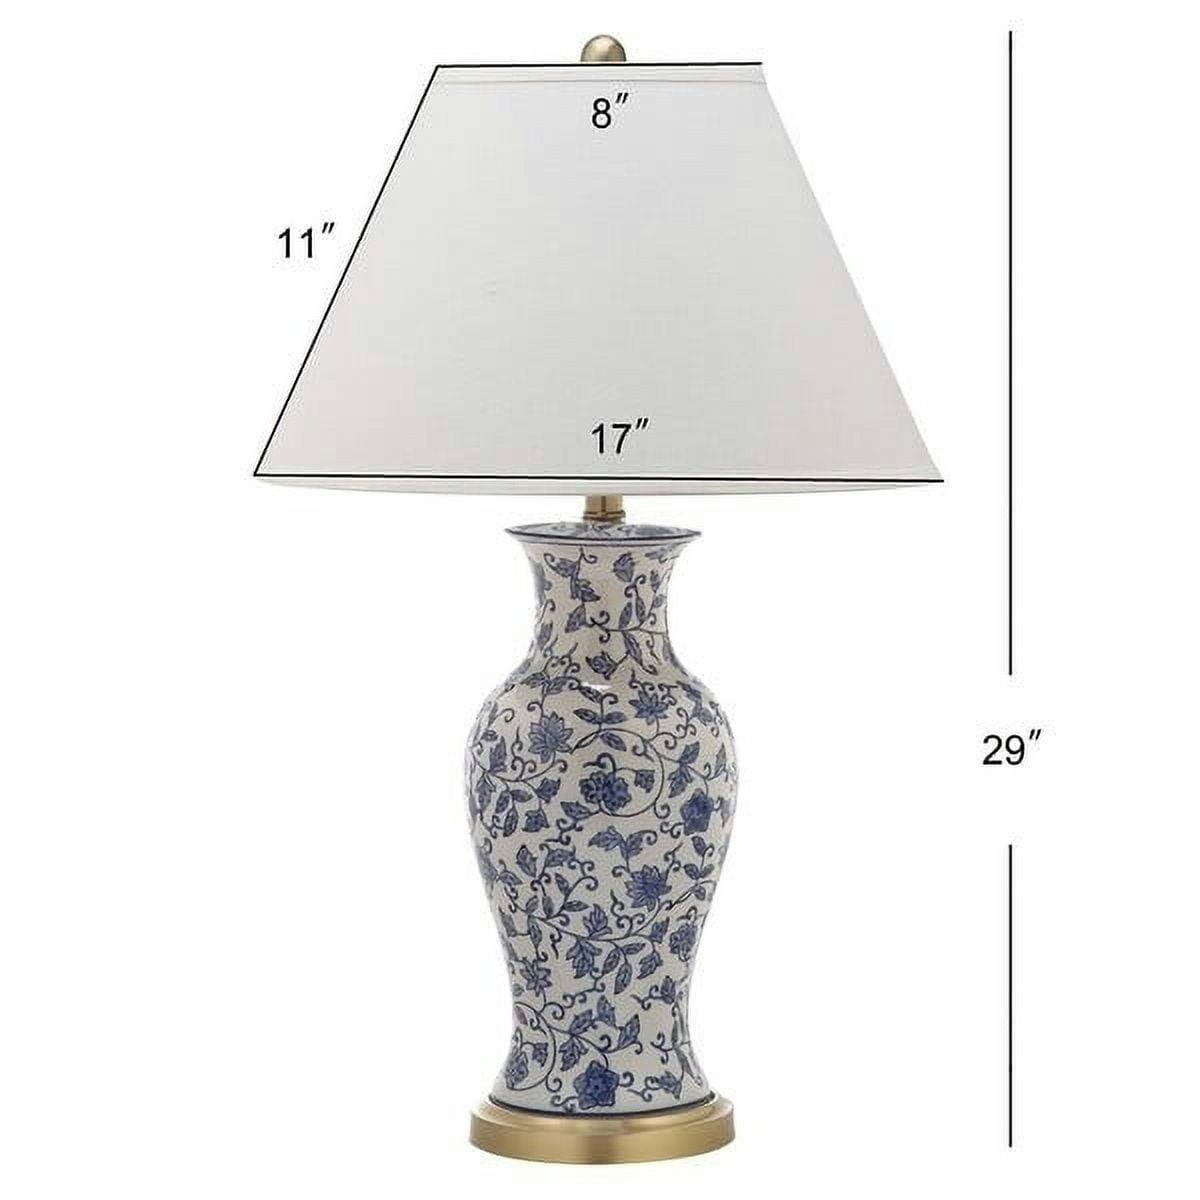 Beijing Blue and White Floral Urn Ceramic Table Lamp Set, 29"